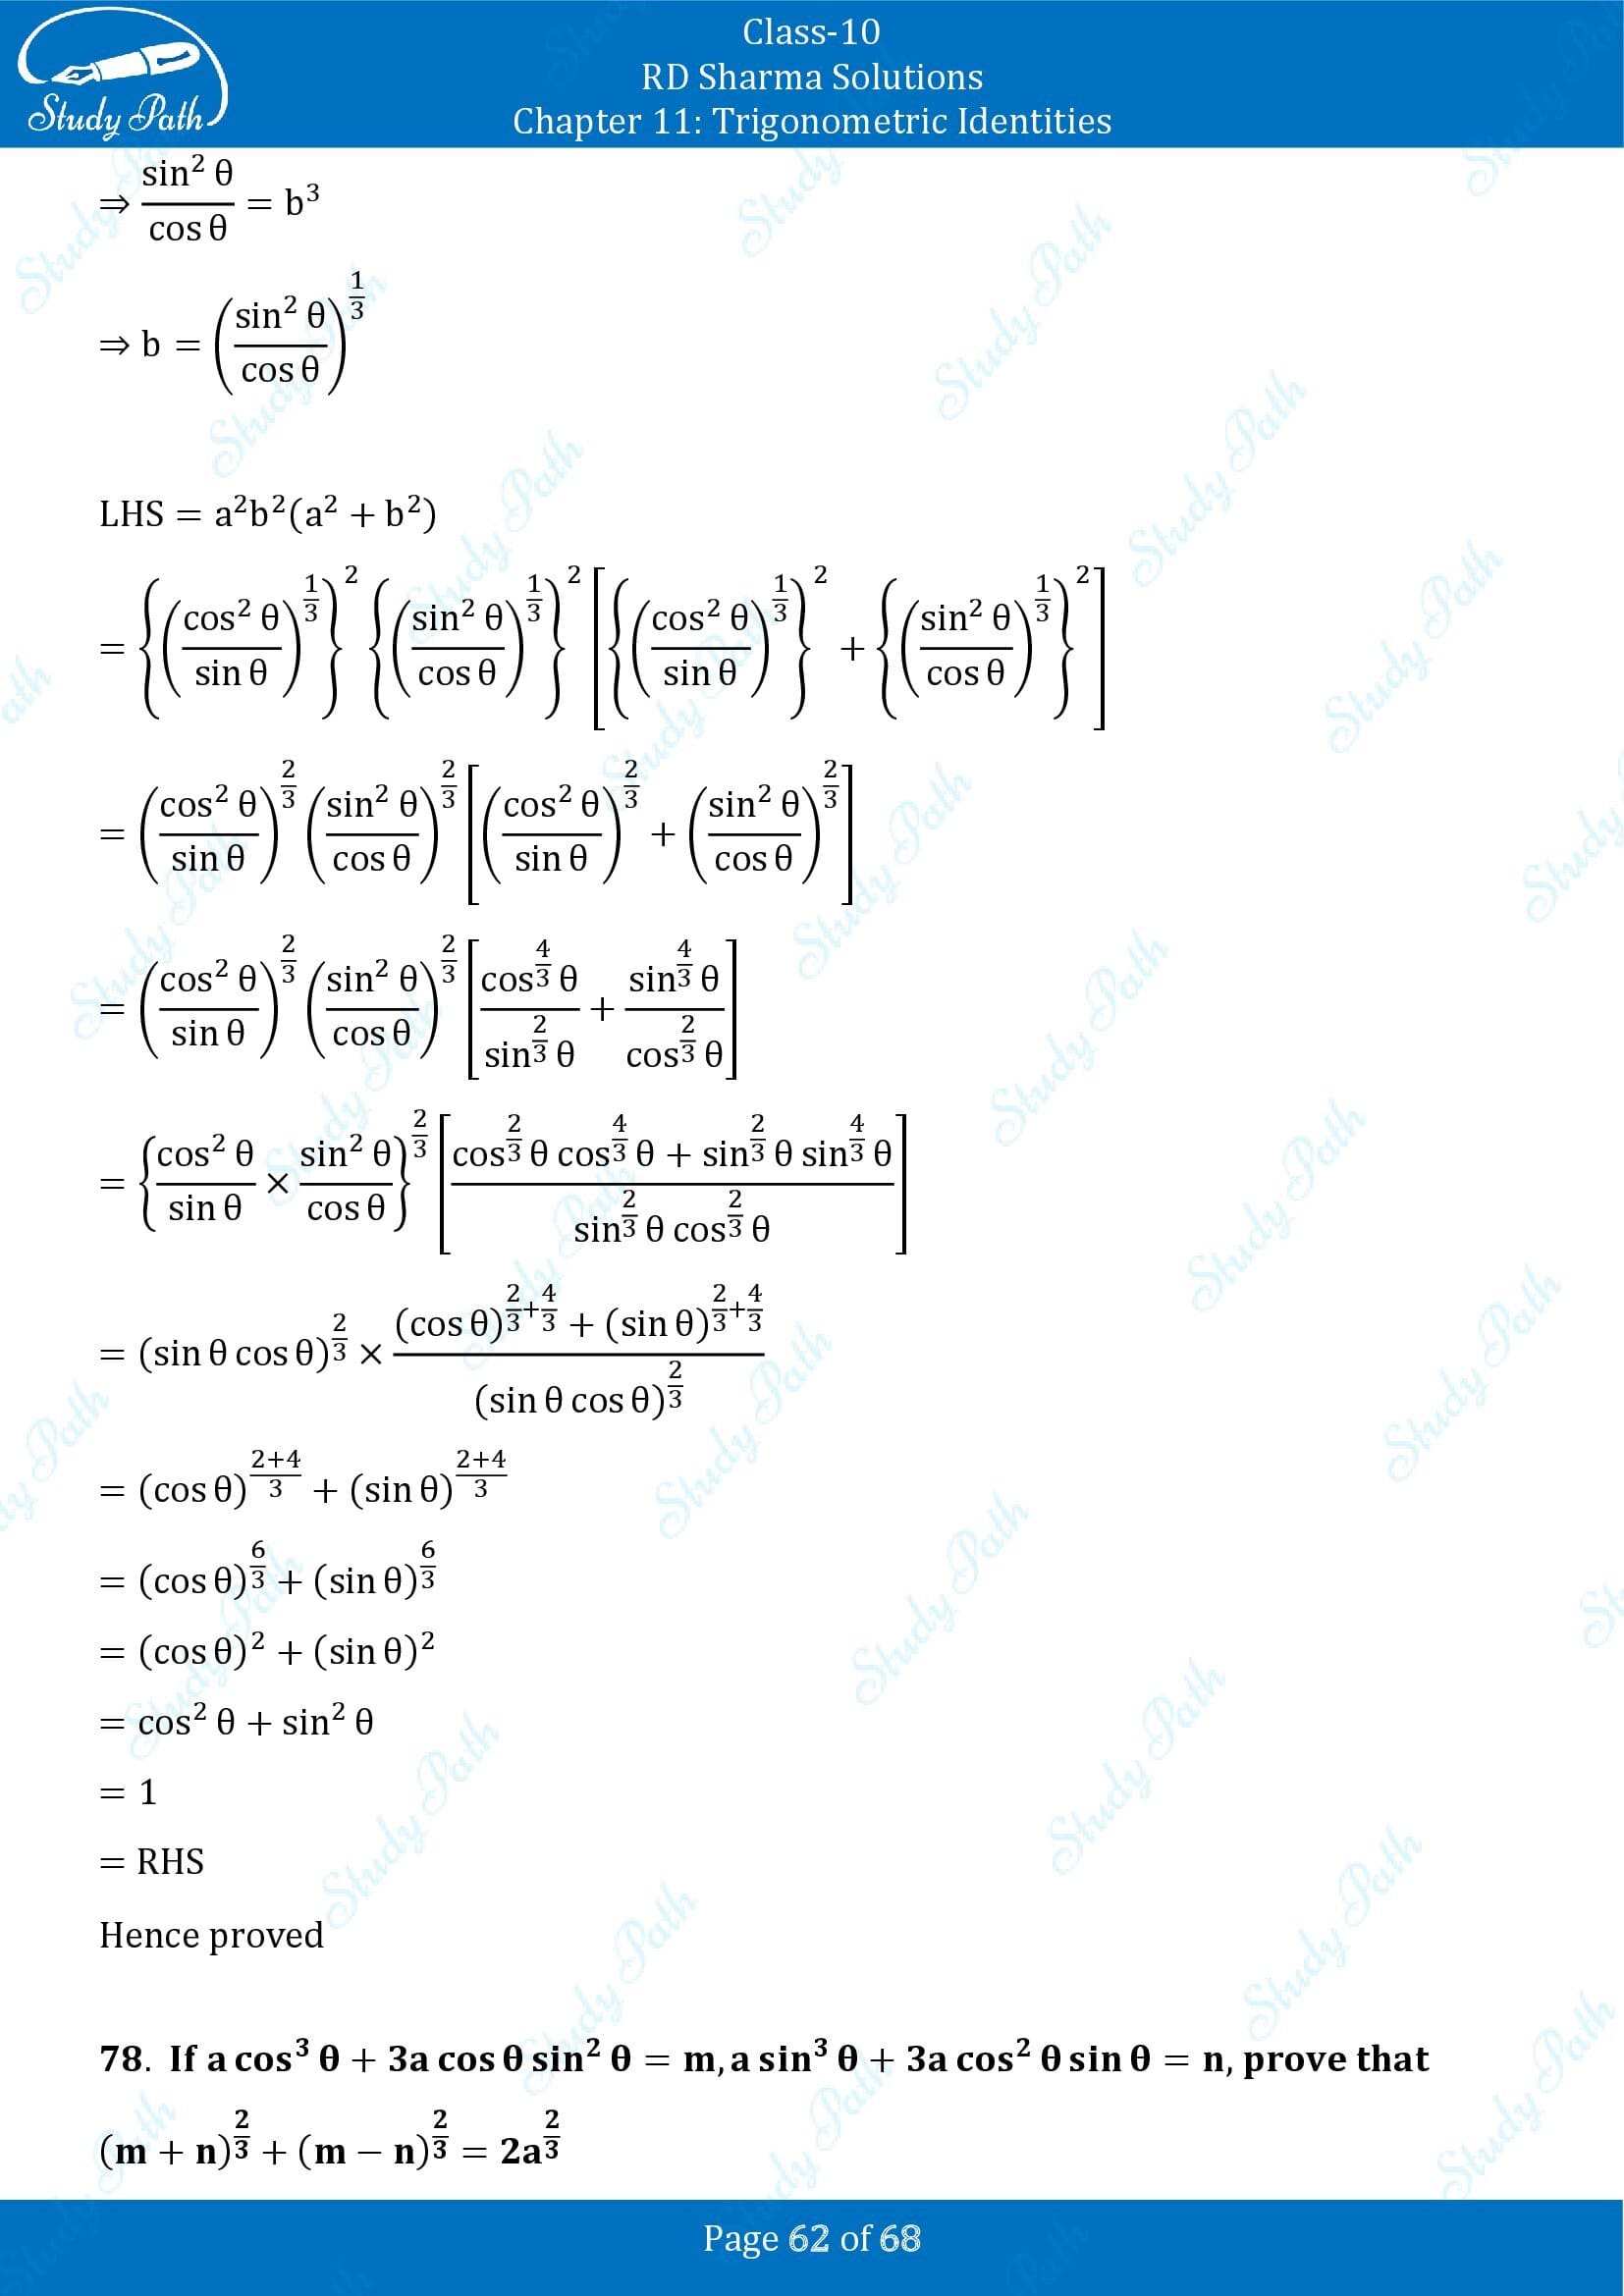 RD Sharma Solutions Class 10 Chapter 11 Trigonometric Identities Exercise 11.1 00062